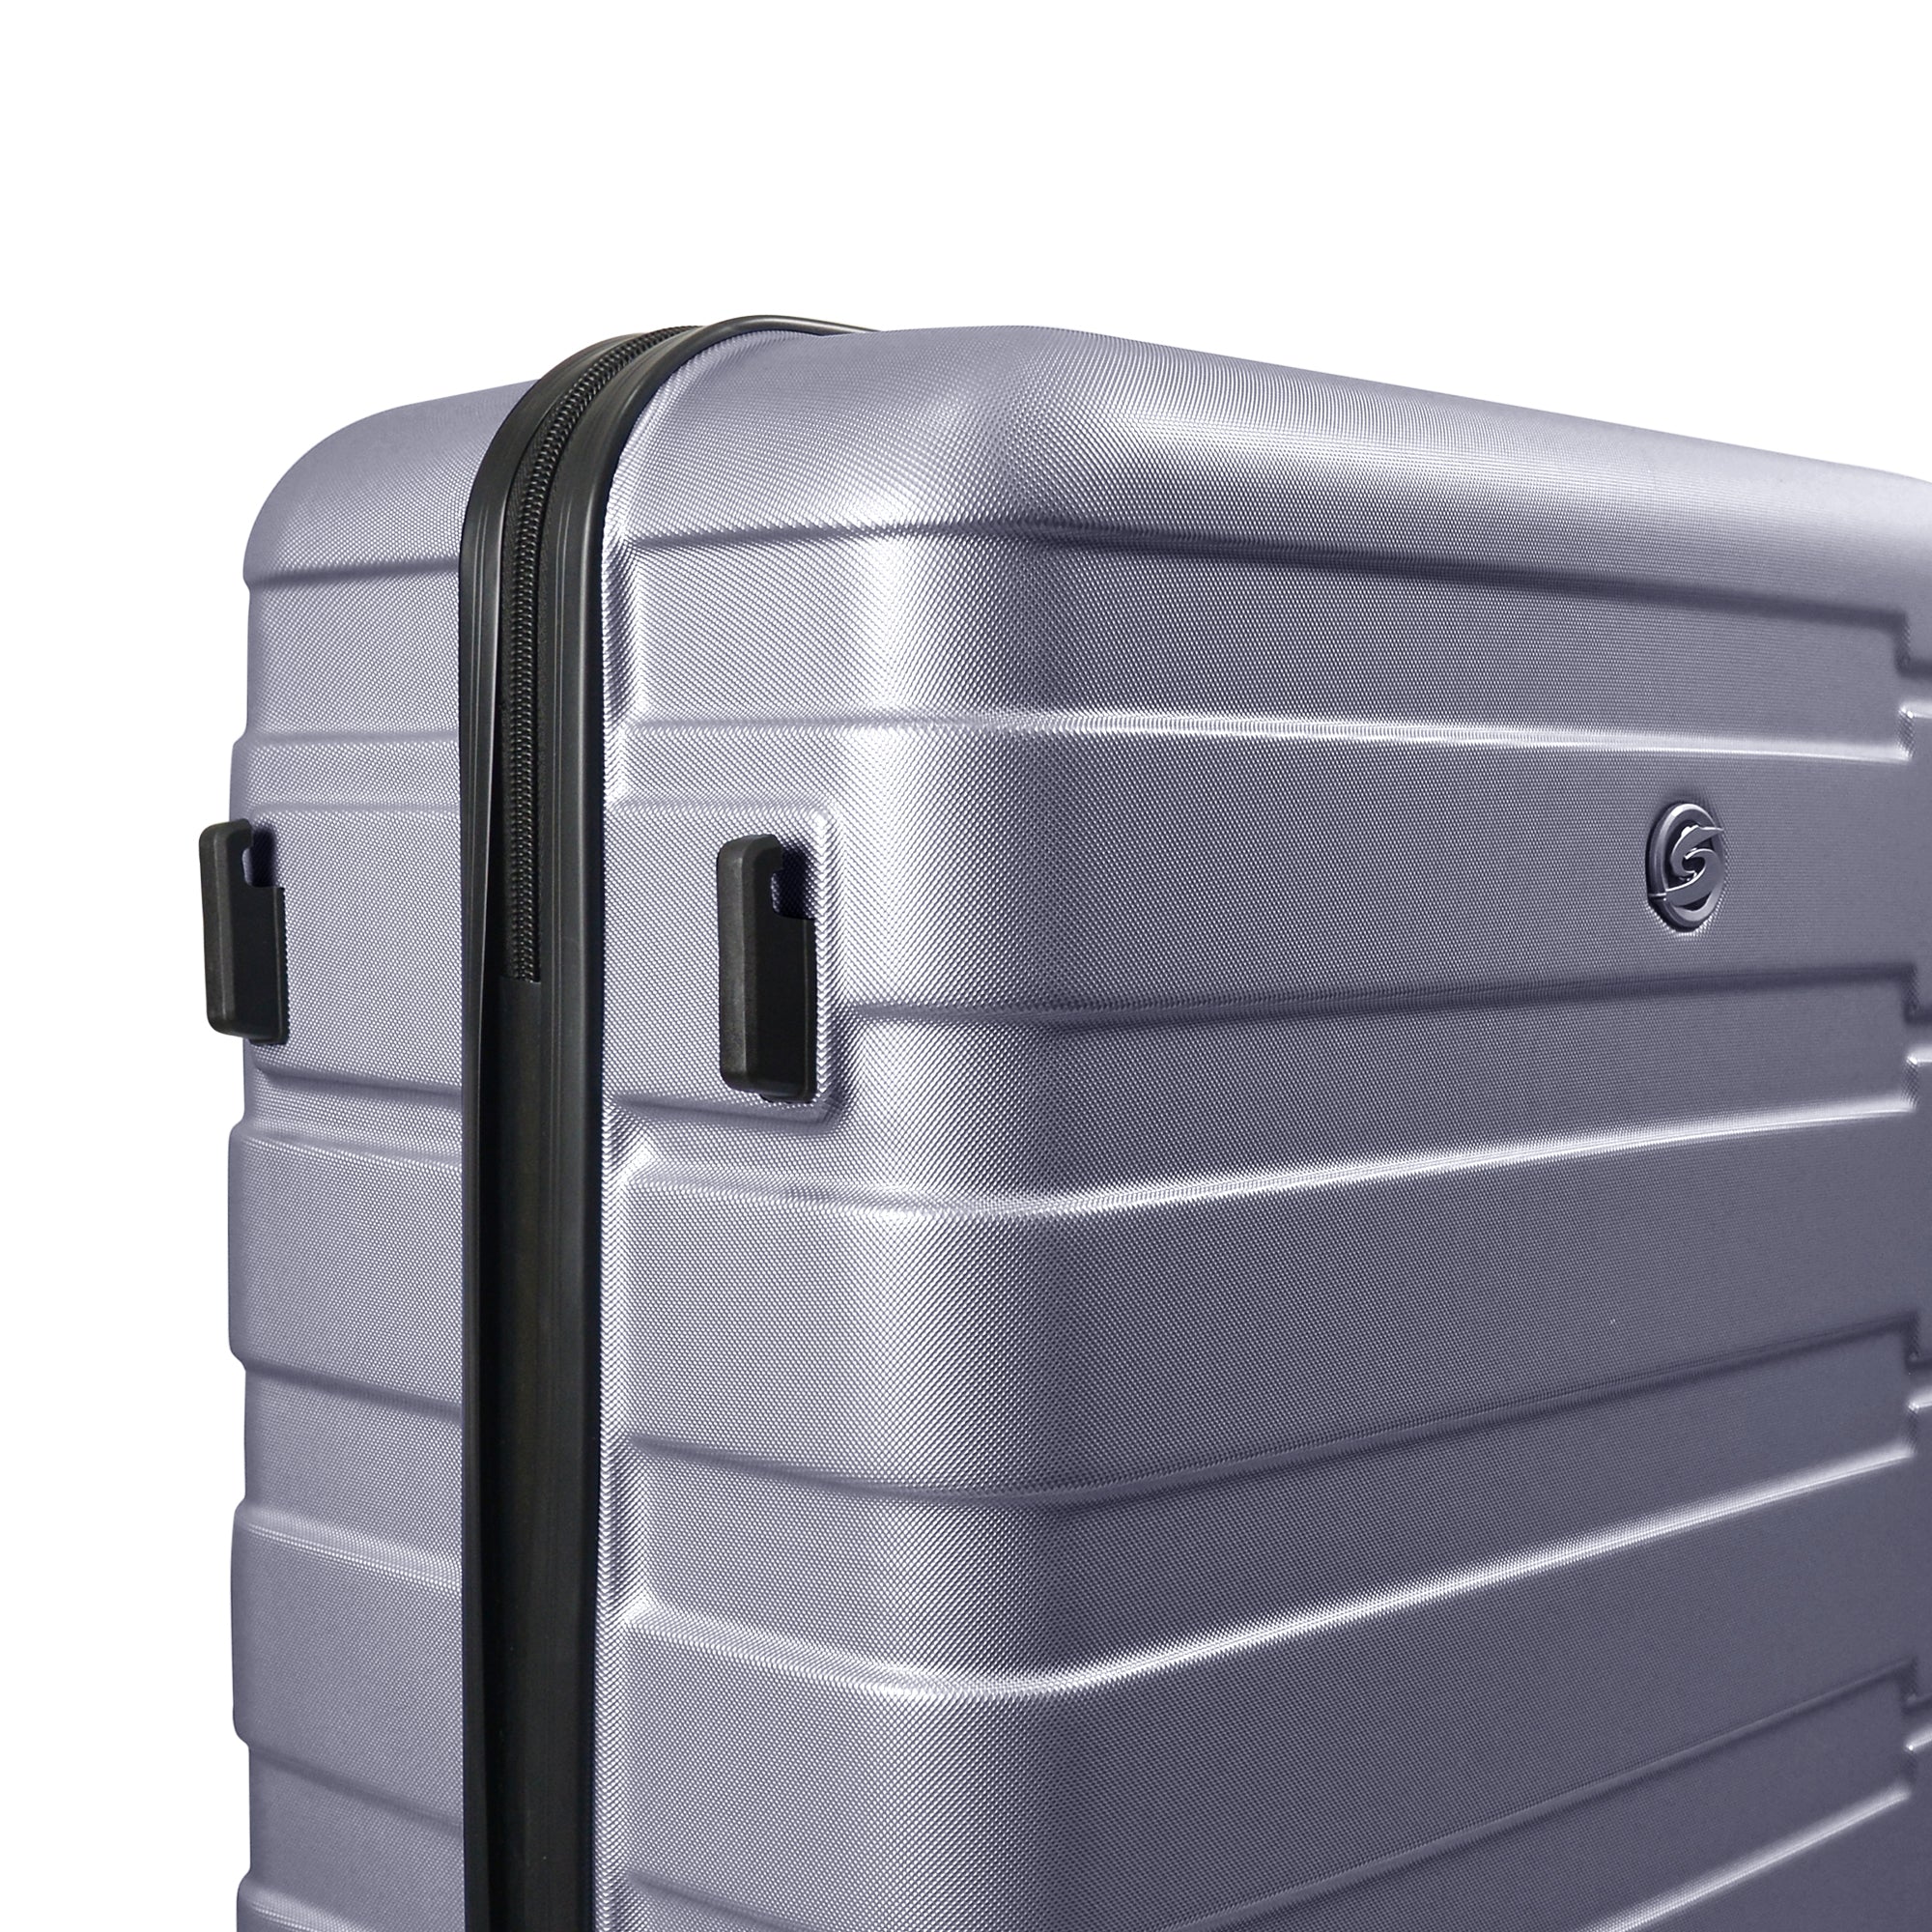 Luggage Sets 2 Piece, 20 inch 24 inch Carry on Luggage silver+grey-abs